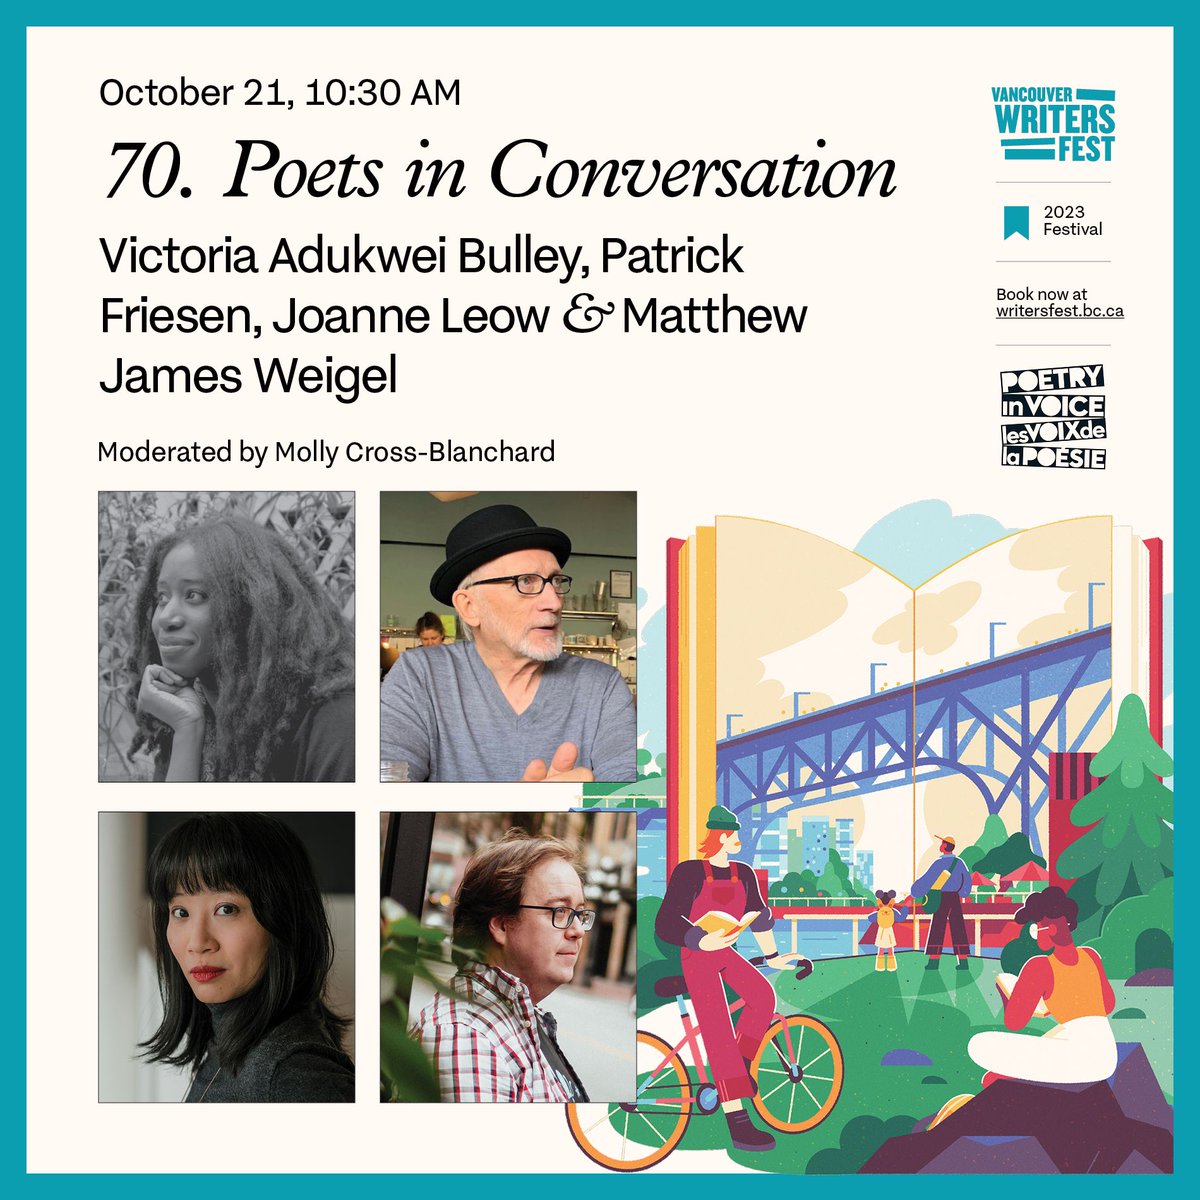 @victoriaadukwei @SpongePoet @KwantlenCRWR 📚 70. Poets in Conversation – Consciousness-expanding poetry with @victoriaadukwei, Patrick Friesen, @joleow, and @spongepoet. Moderated by @MollyECB and presented in collaboration with @PIVLVP. writersfest.bc.ca/festival-event…